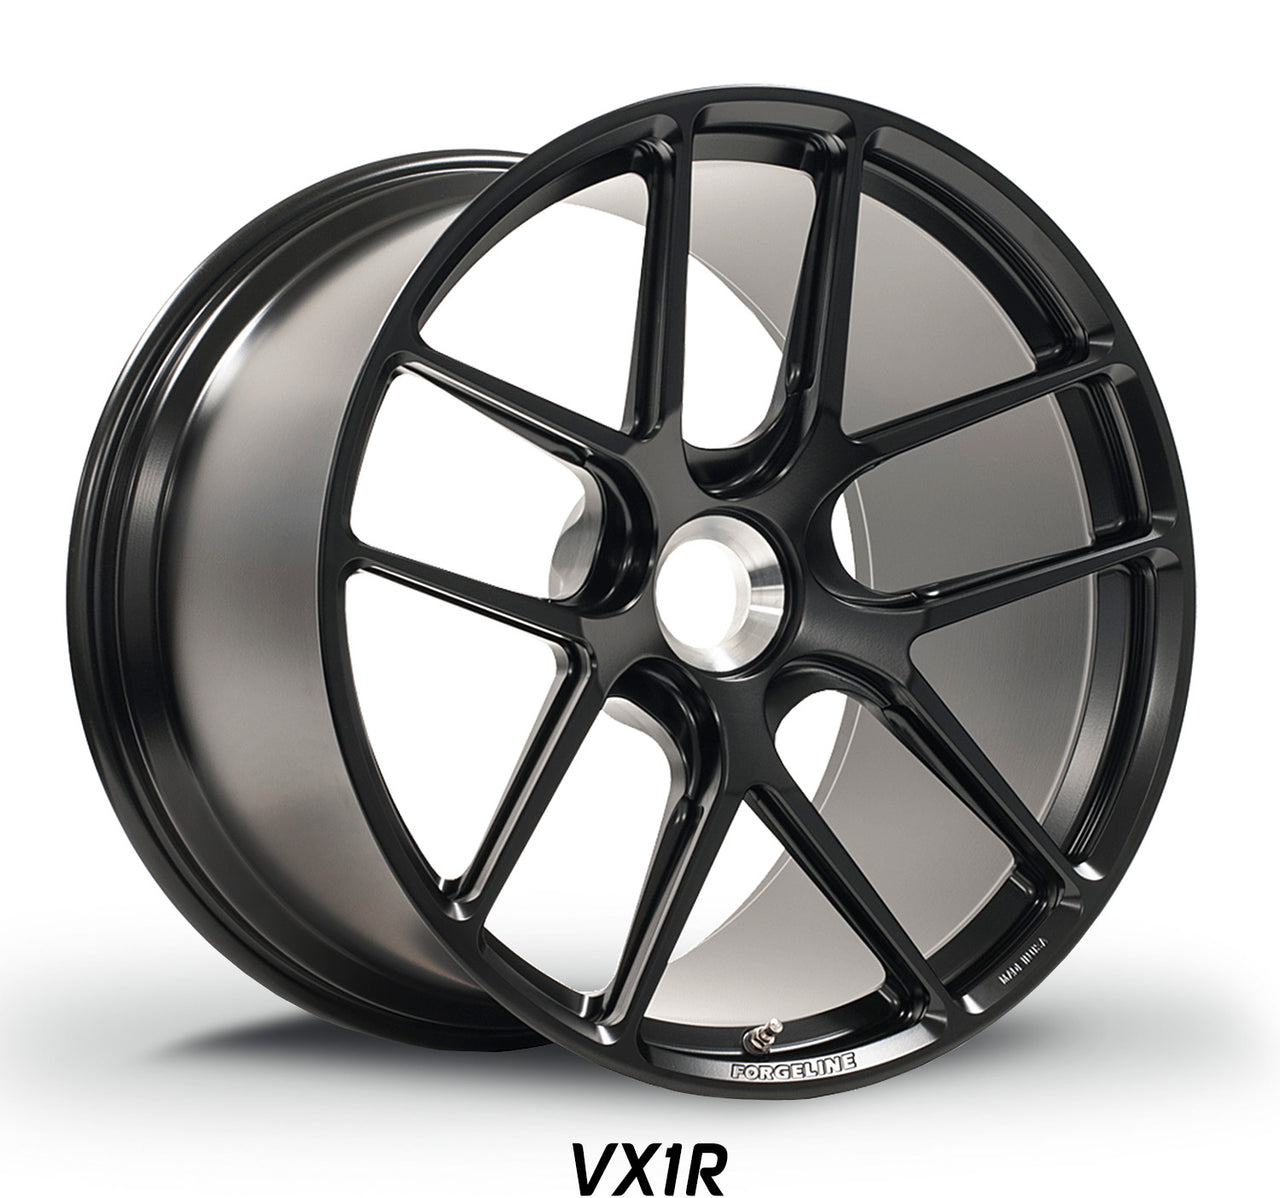 Forgeline VX1R for Porsche 992 GT3 forged 6061-T6 wheels the lightest motorsport wheels for track day HPDE time trials